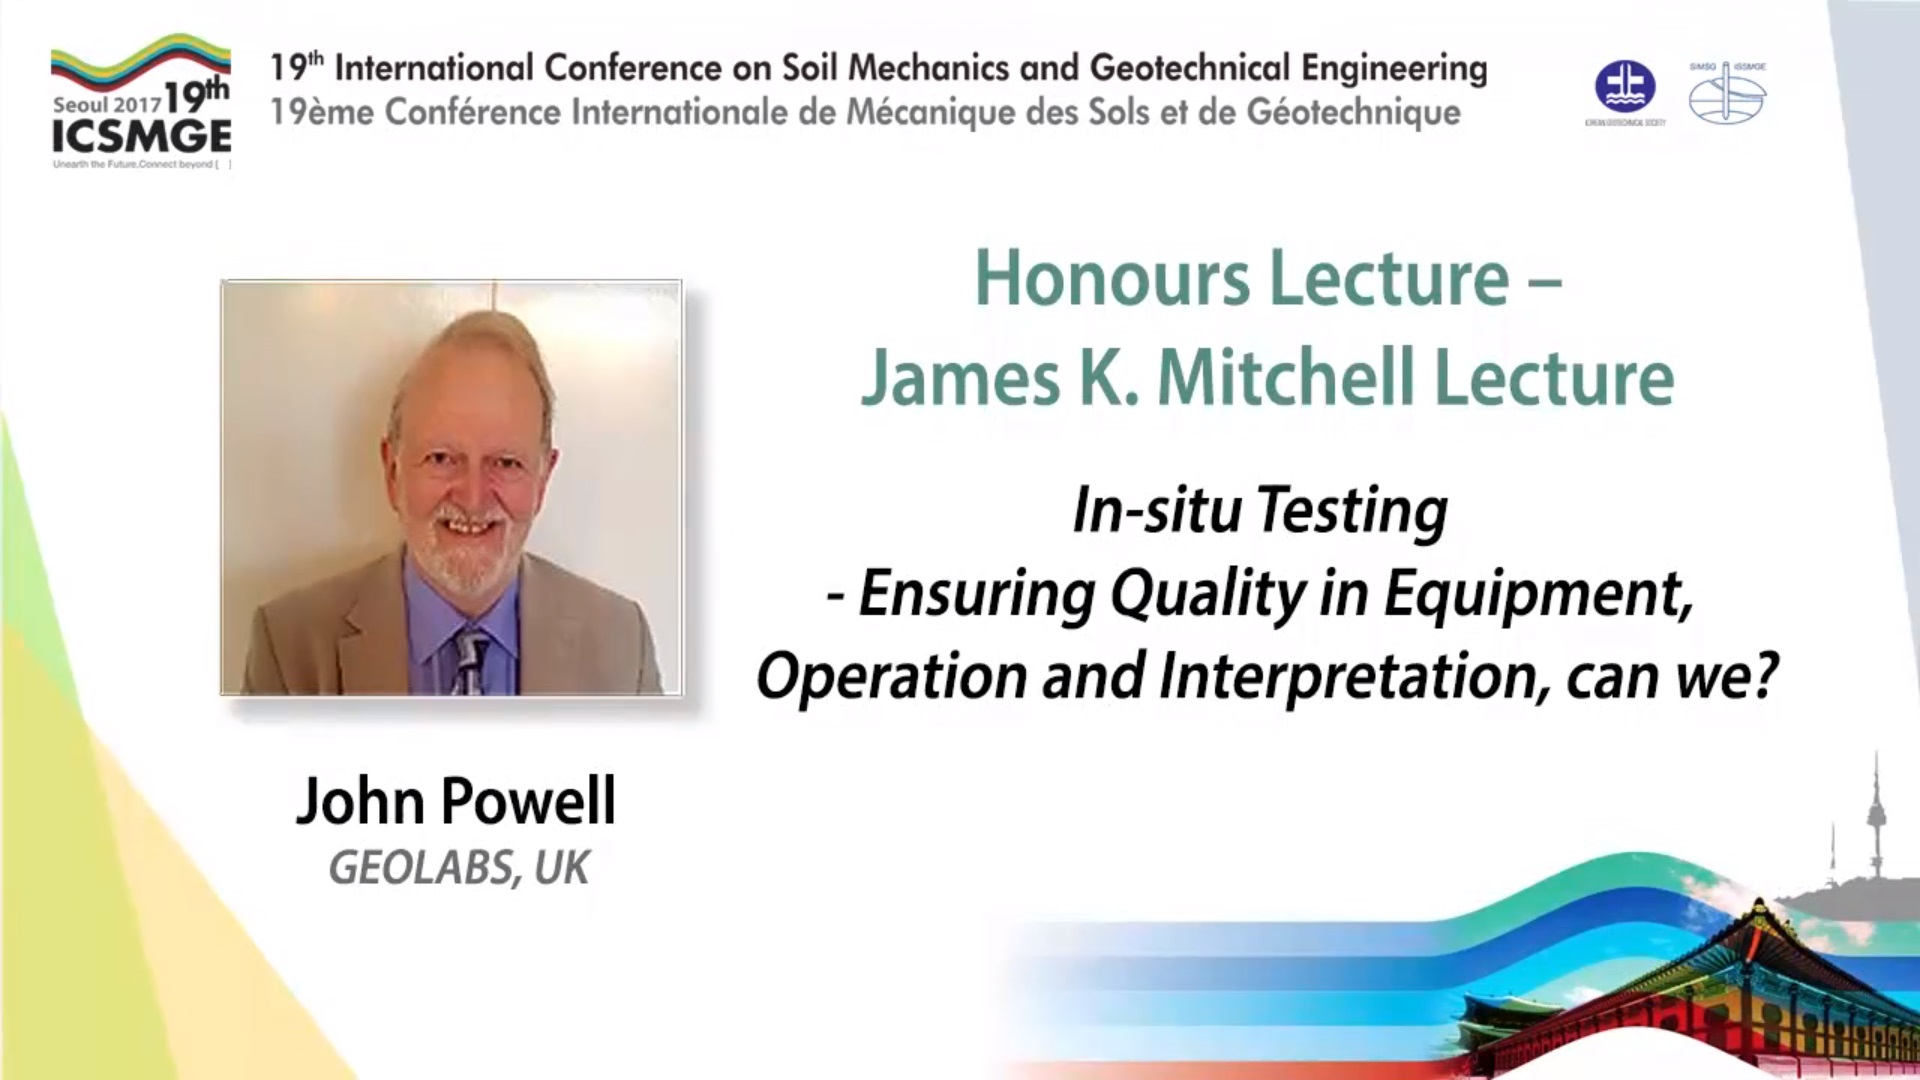 In-situ Testing - Ensuring Quality in Equipment, Operation and Interpretation, can we? (James K. Mitchell Lecture - 19th ICSMGE) {"category":"honour_lecture","subjects":["In-situ Testing"],"number":"ICSMGE19103","instructors":["John Powell"]}